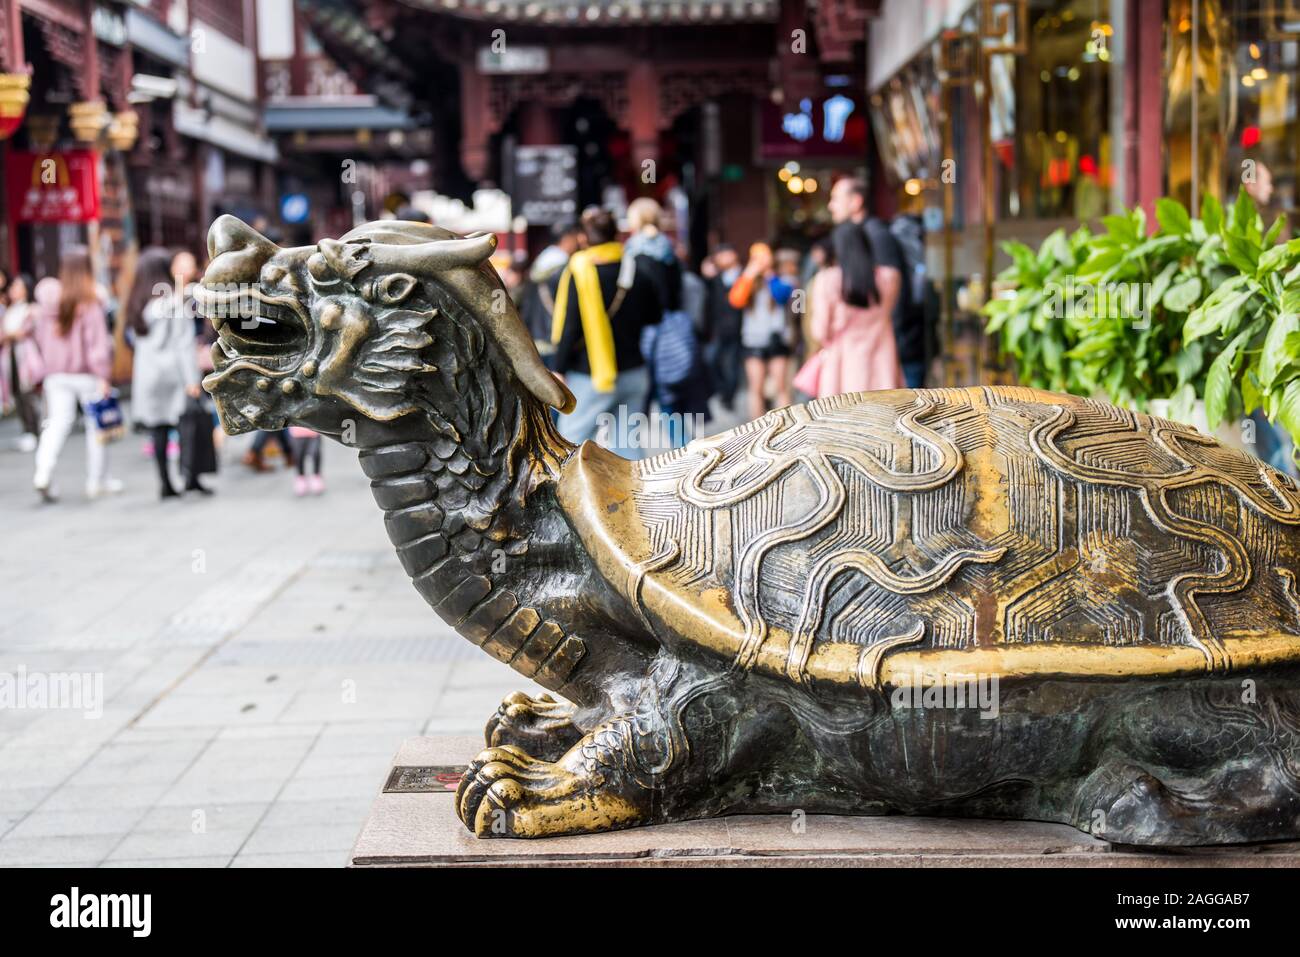 Bronze Bixi statue in chenghuang temple shanghai, China.  A figure from Chinese mythology. One of the 9 sons of the Dragon King, he is depicted as a d Stock Photo